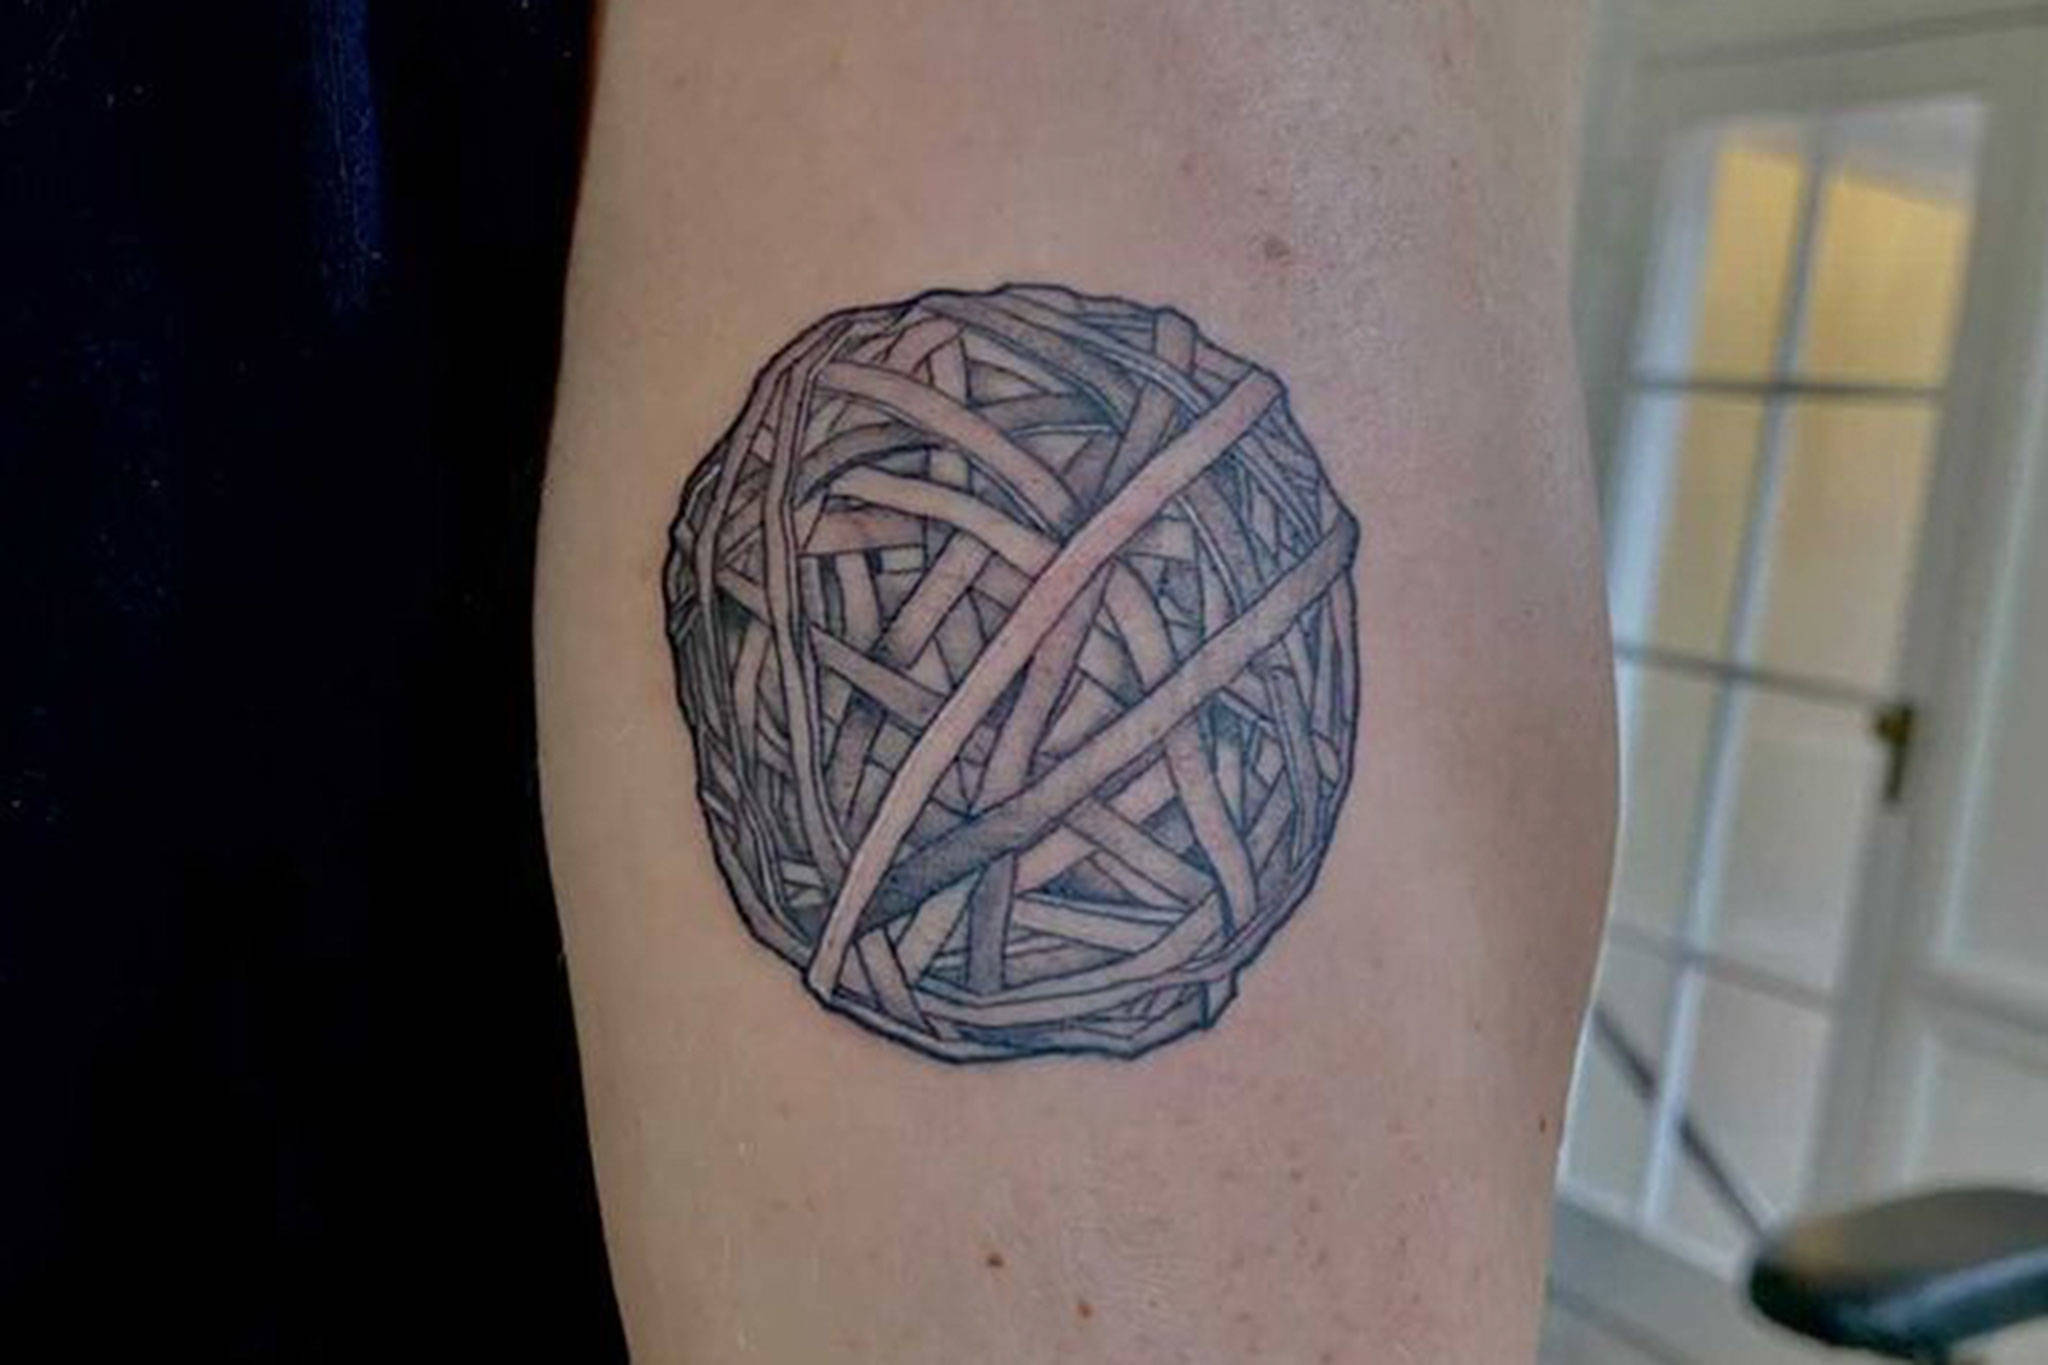 Jayson Brocklesby of Agnew received a free tattoo in Tacoma for his video adventure trying to make a 500 pound rubber band ball. He would only get the tattoo, he said, if 250,000 people liked the video. It took less than two hours to reach the goal, he said. Photo courtesy of Jayson Brocklesby